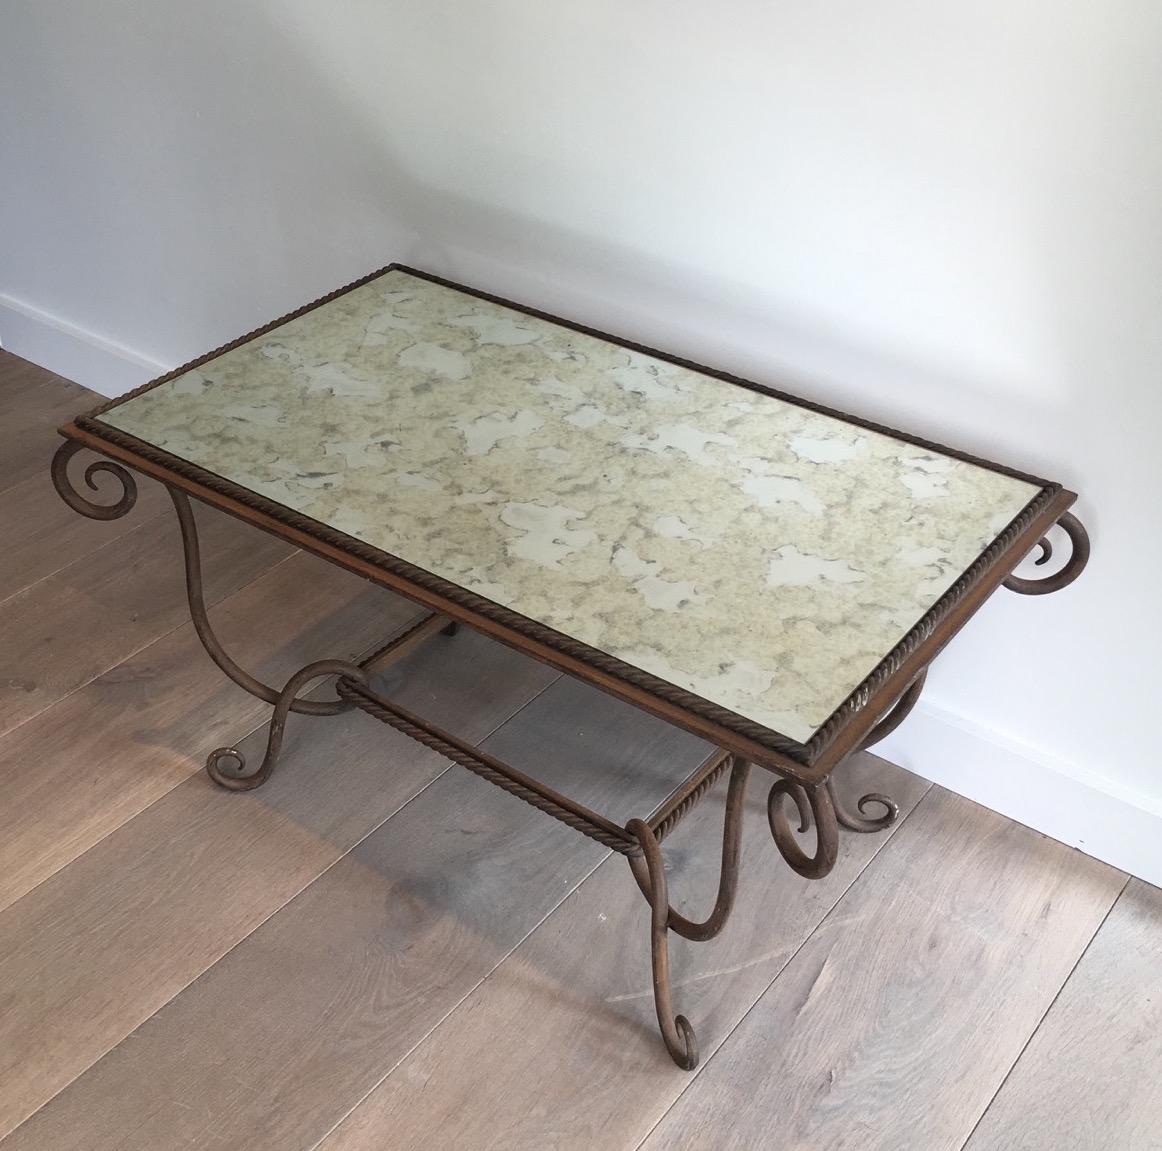 René Prou, Wrought and Hammered Iron Coffee Table with Faux-Antique Mirror Top 7